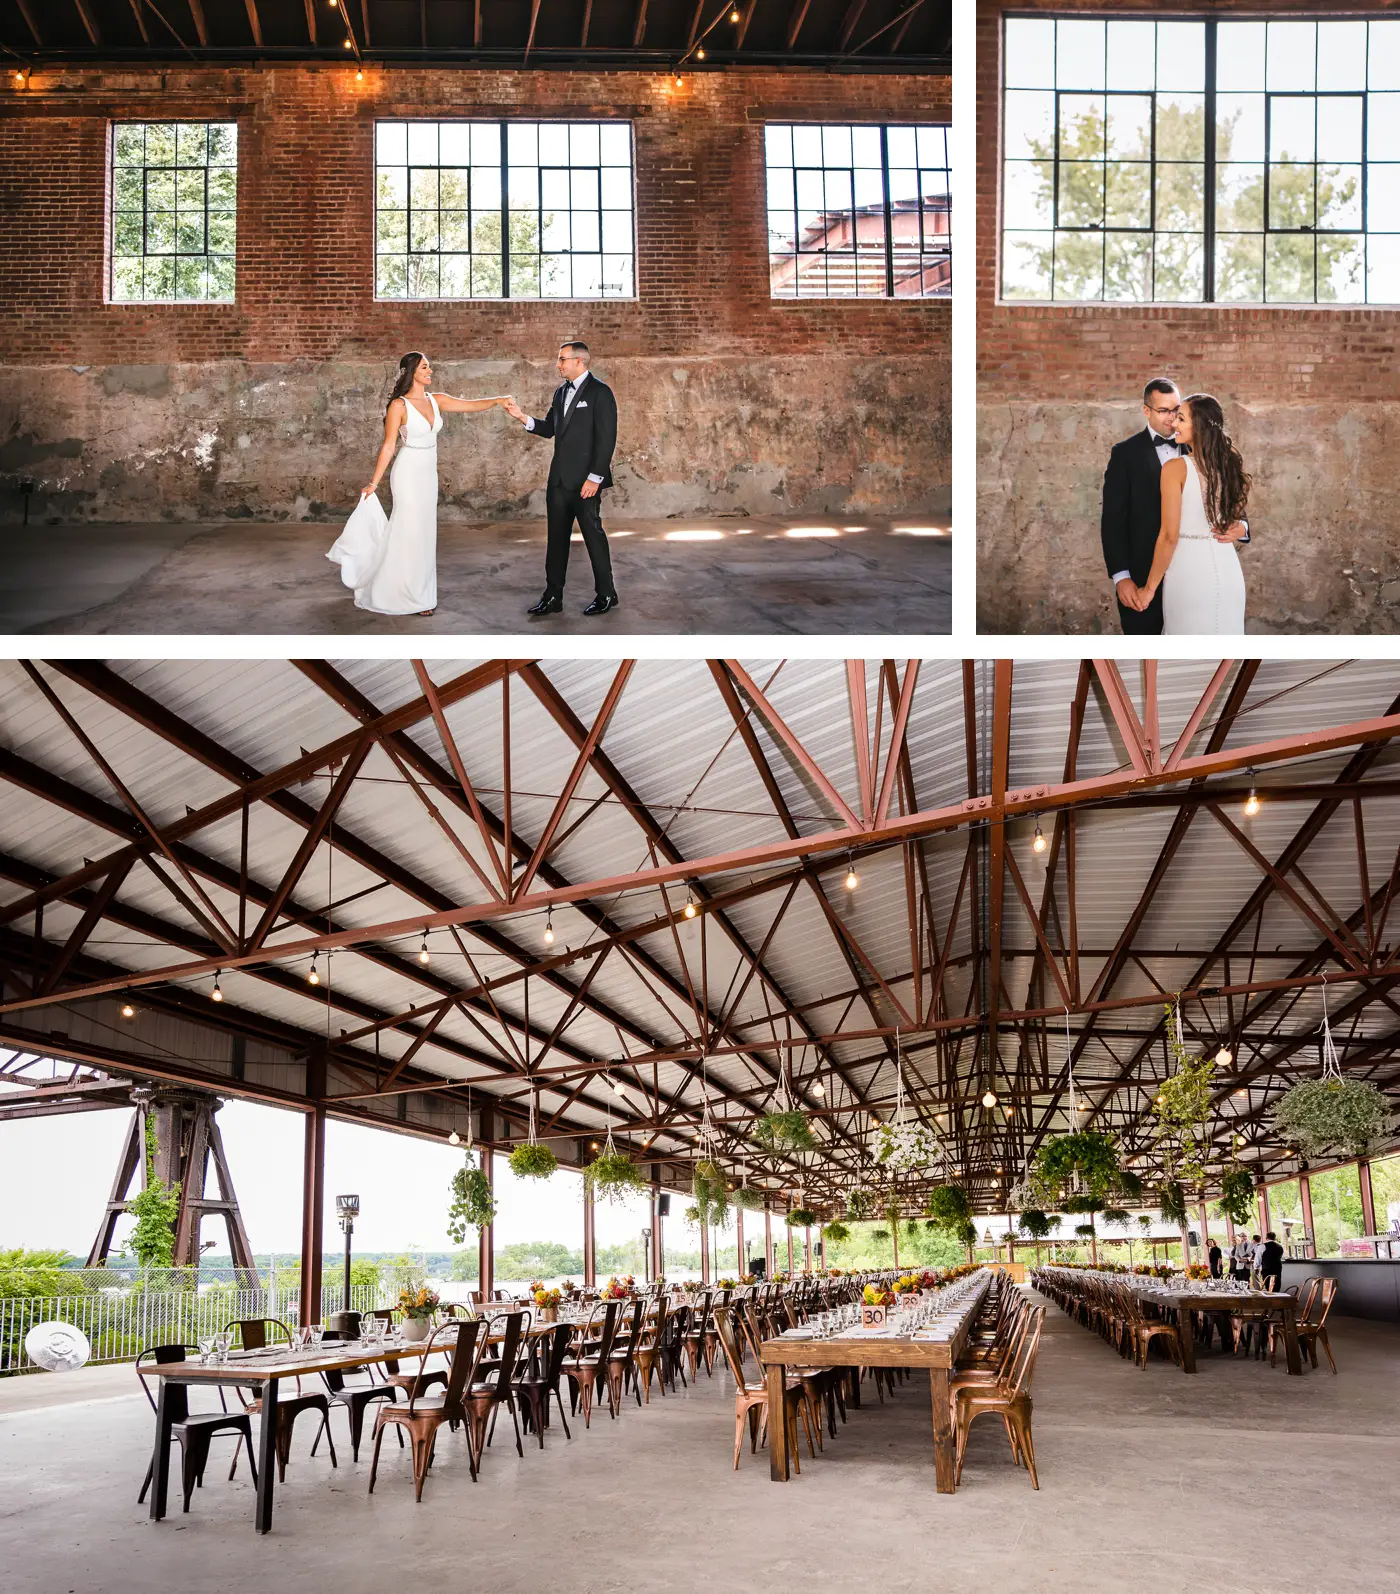 Verves 10 Most Intriguing Wedding Venues in Upstate New York 2020 ...